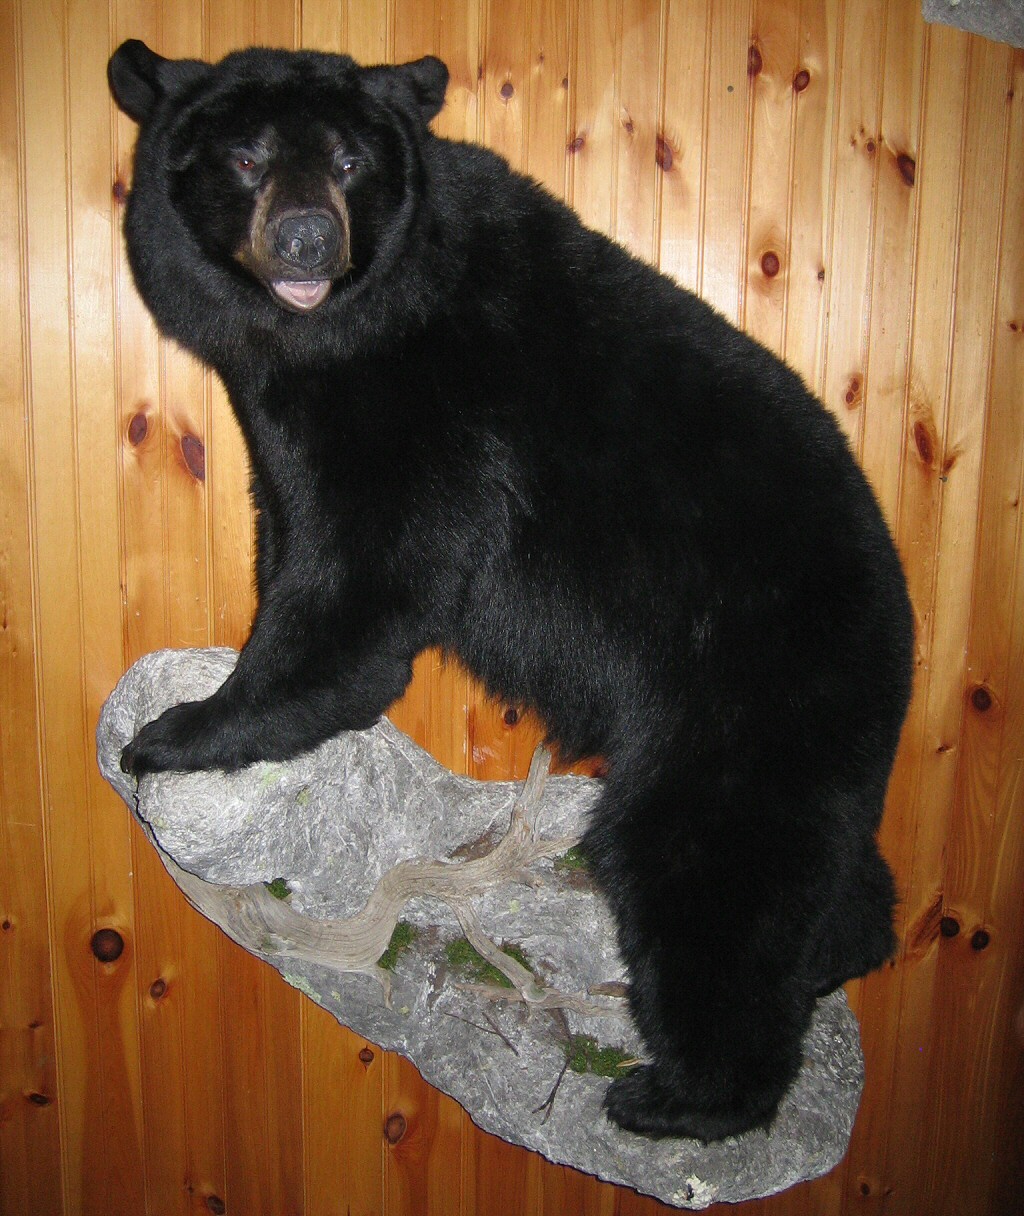 Black Bear Full Body Wall Mounts - Black Bears Full Body Mounted For Walls - Custom Mounted On Branches, Trees, Logs, Rocks With Natural Habitats